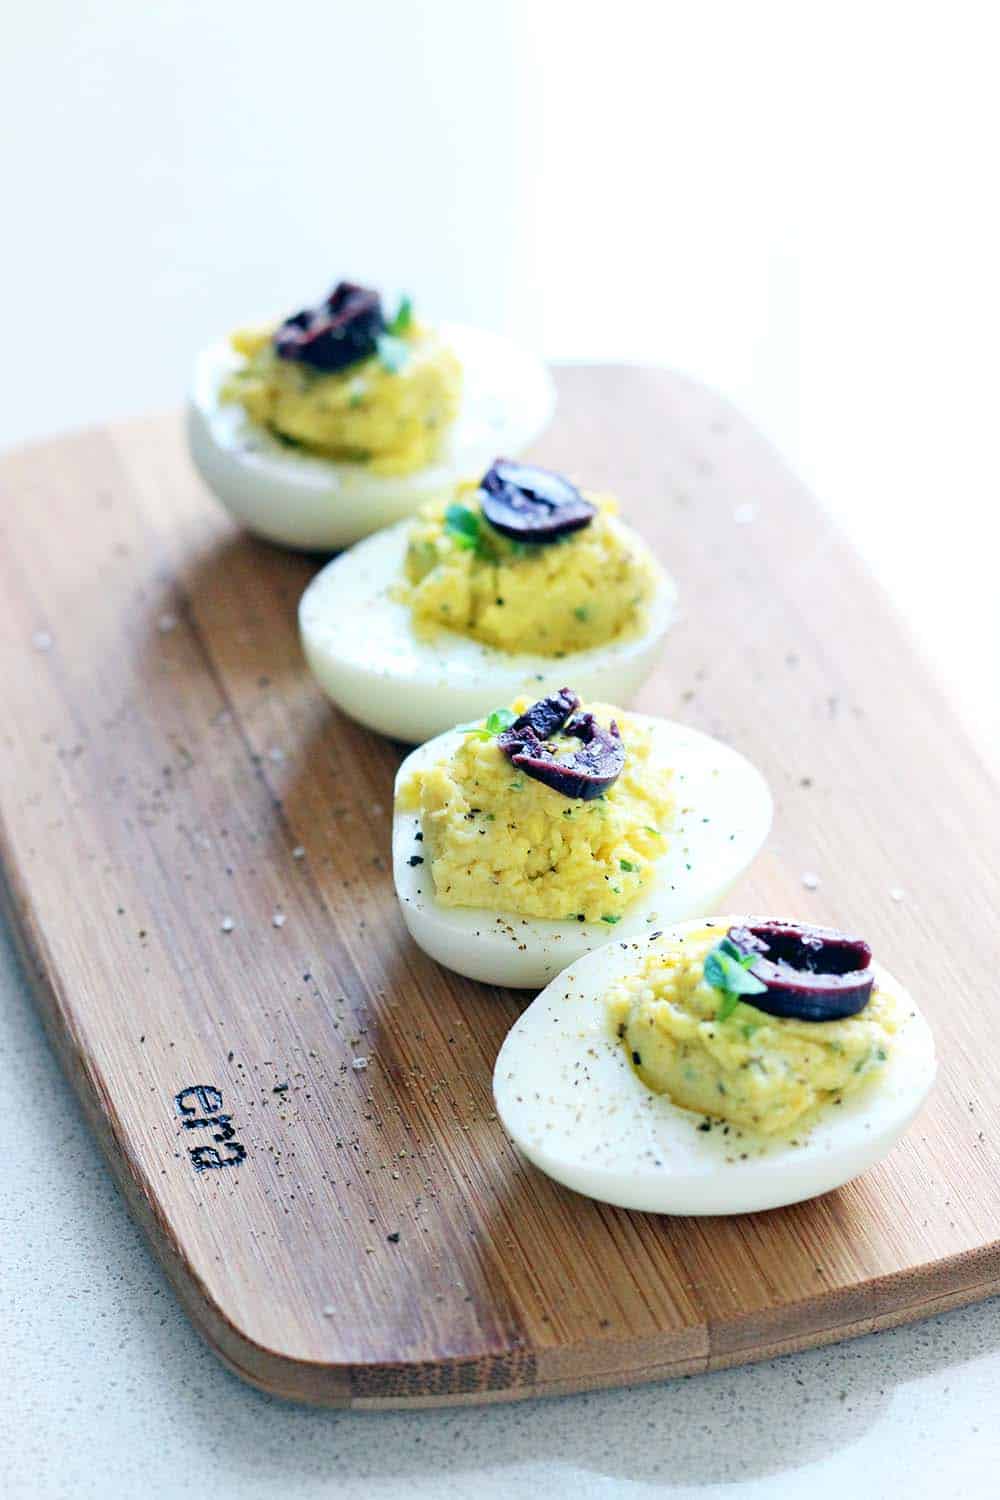 Olive oil and red wine vinegar are used in place of mayo and mustard with fresh oregano in this Greek Deviled Egg recipe. Paleo and Whole30 compliant!